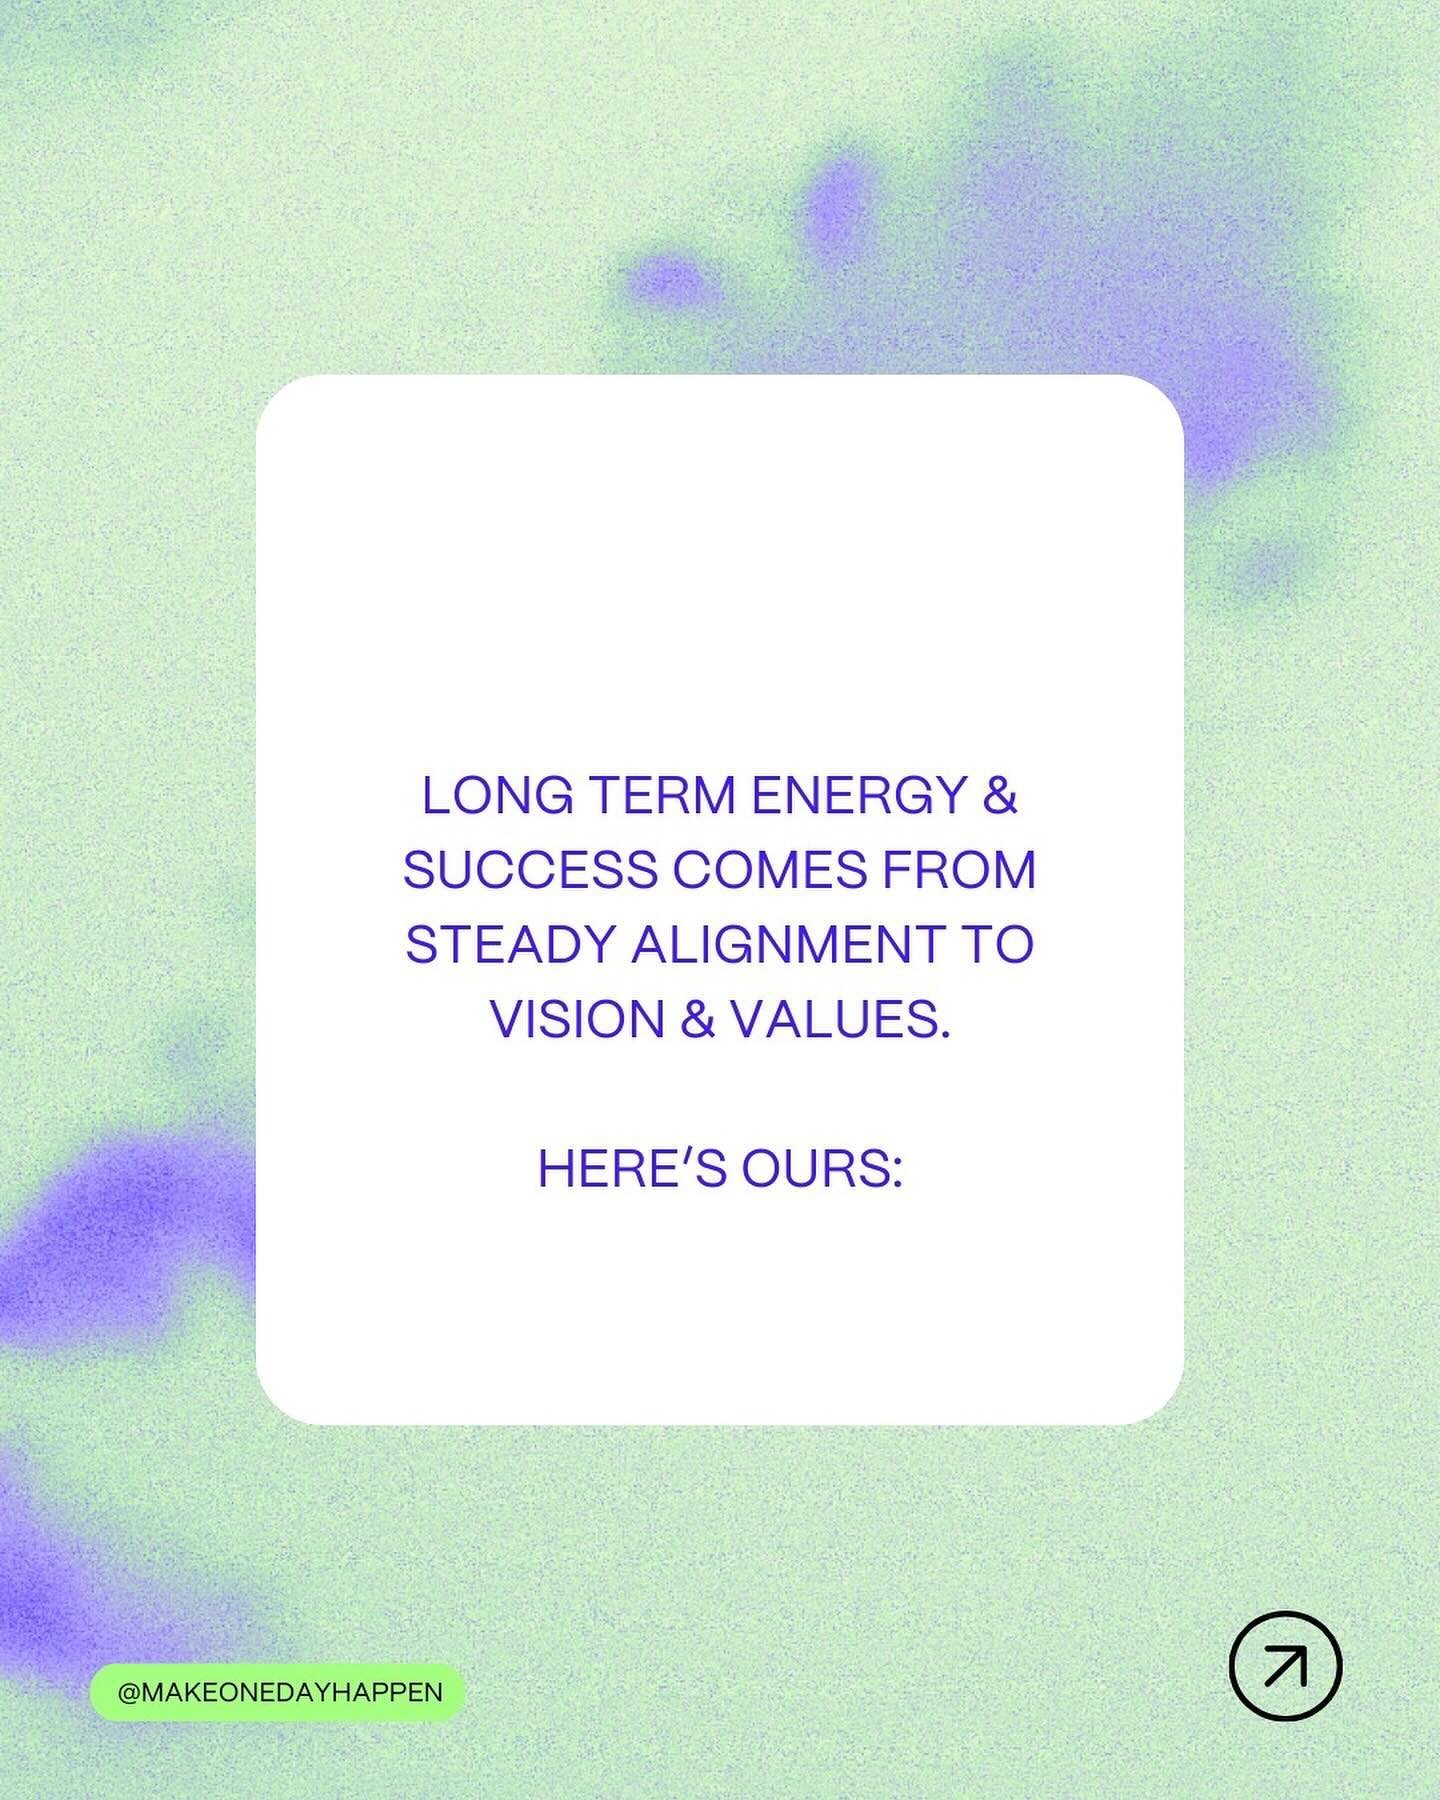 Alignment is a buzzword these days, however if you don&rsquo;t have a clear vision &amp; values then it&rsquo;s doesn&rsquo;t mean sh*t.
⠀⠀⠀⠀⠀⠀⠀⠀⠀
Your vision holds a futuristic field of energy that you&rsquo;re working towards creating while values 